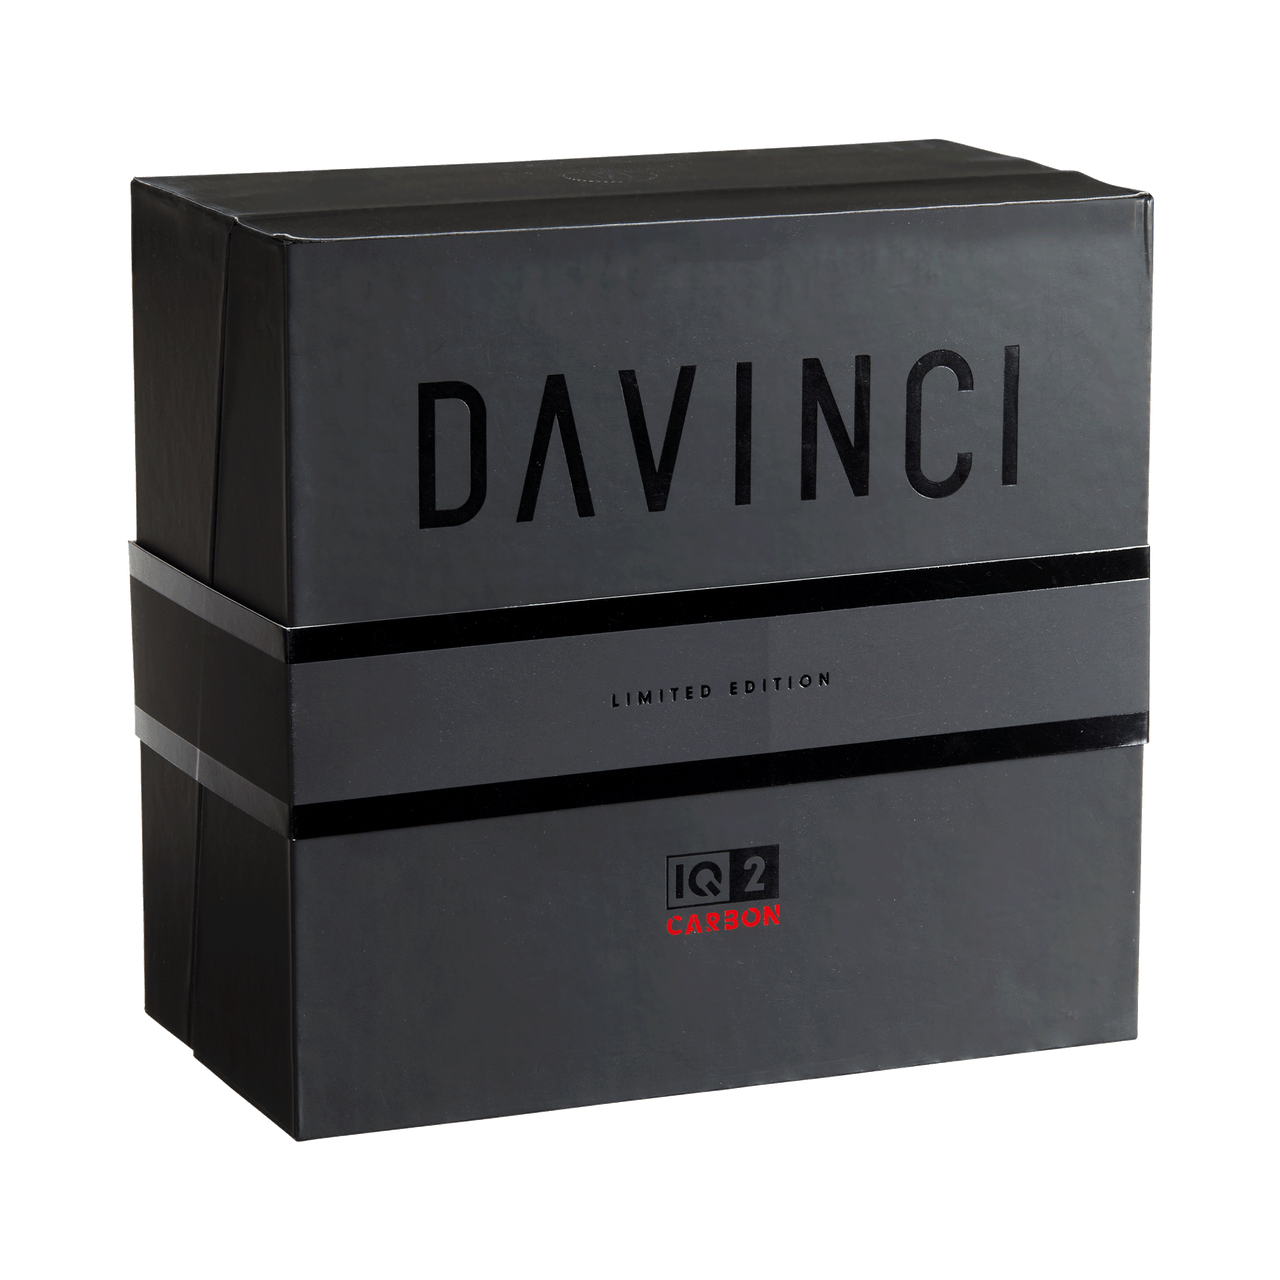 Davinci IQ2 Carbon Vaporizer, Limited Edition Collector's Edition Best Price